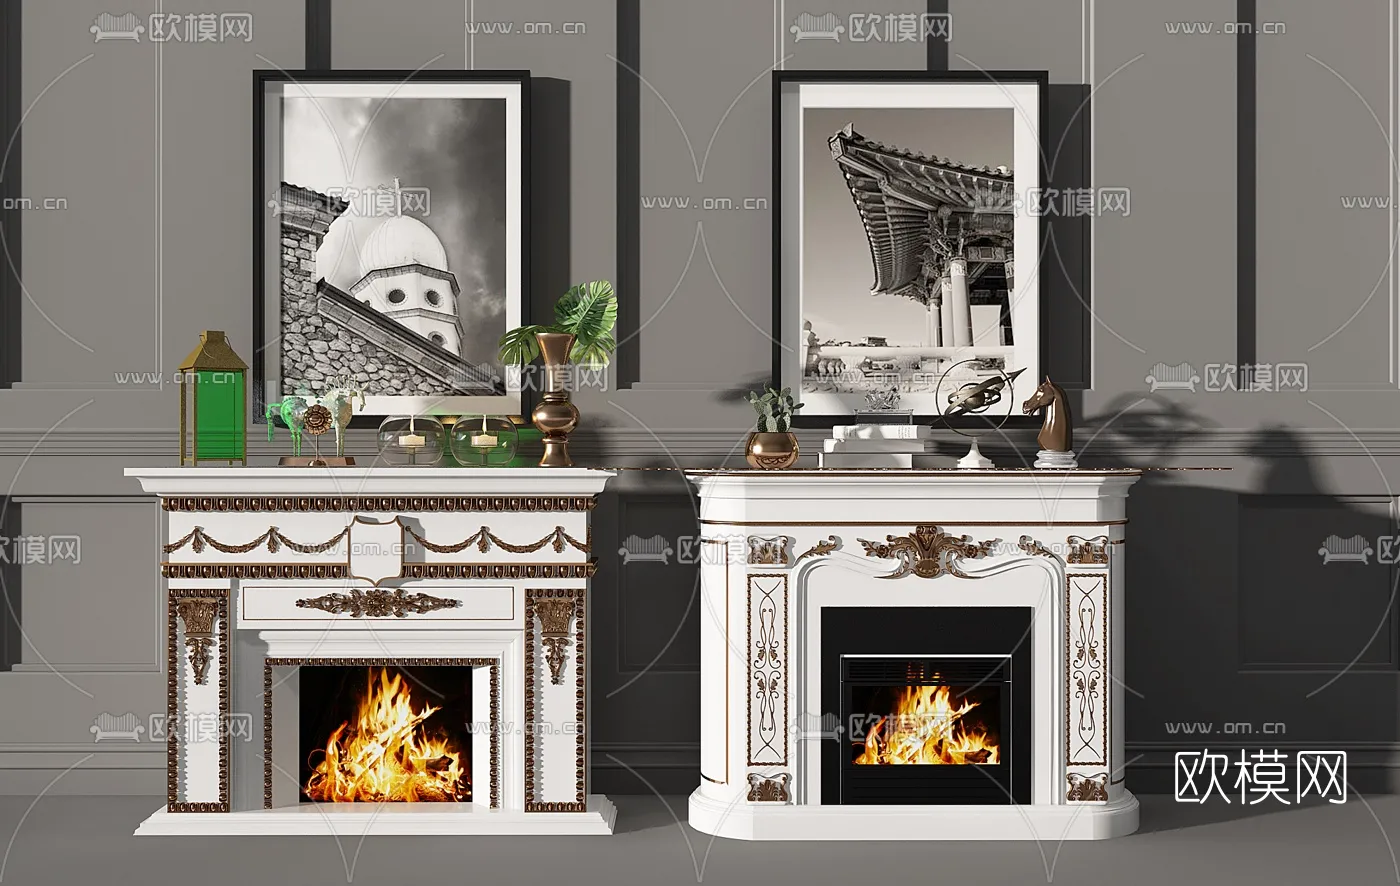 CLASSIC – FIREPLACE 3DMODELS – 031